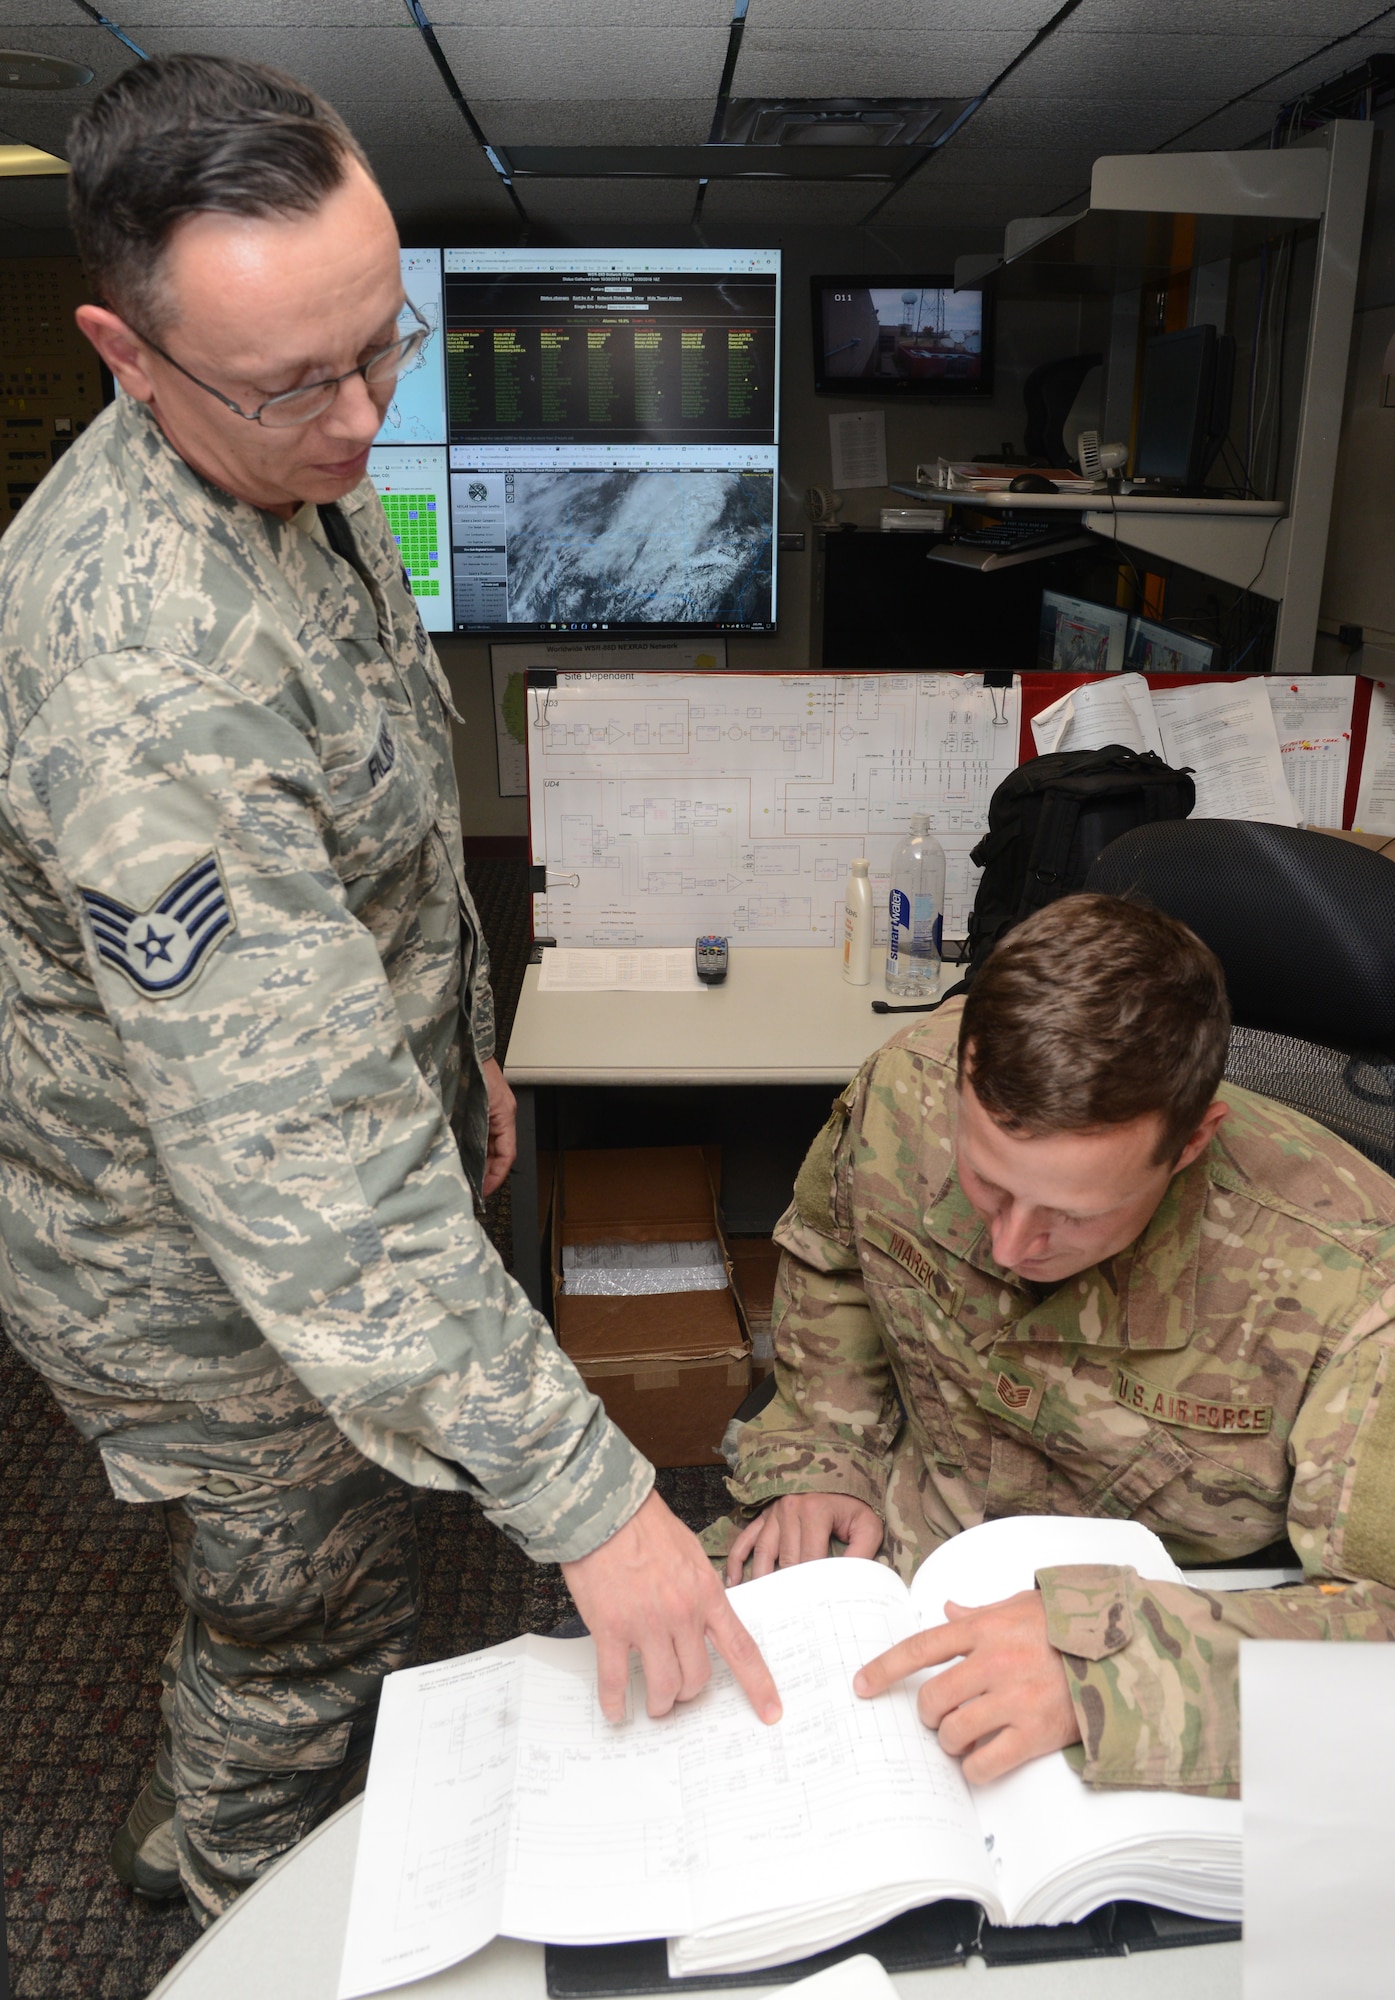 Staff Sgt. Curt Filkins II and Tech. Sgt. Chris Marek, with the Radar Operations Center in Norman, look up technical data of a radar system.